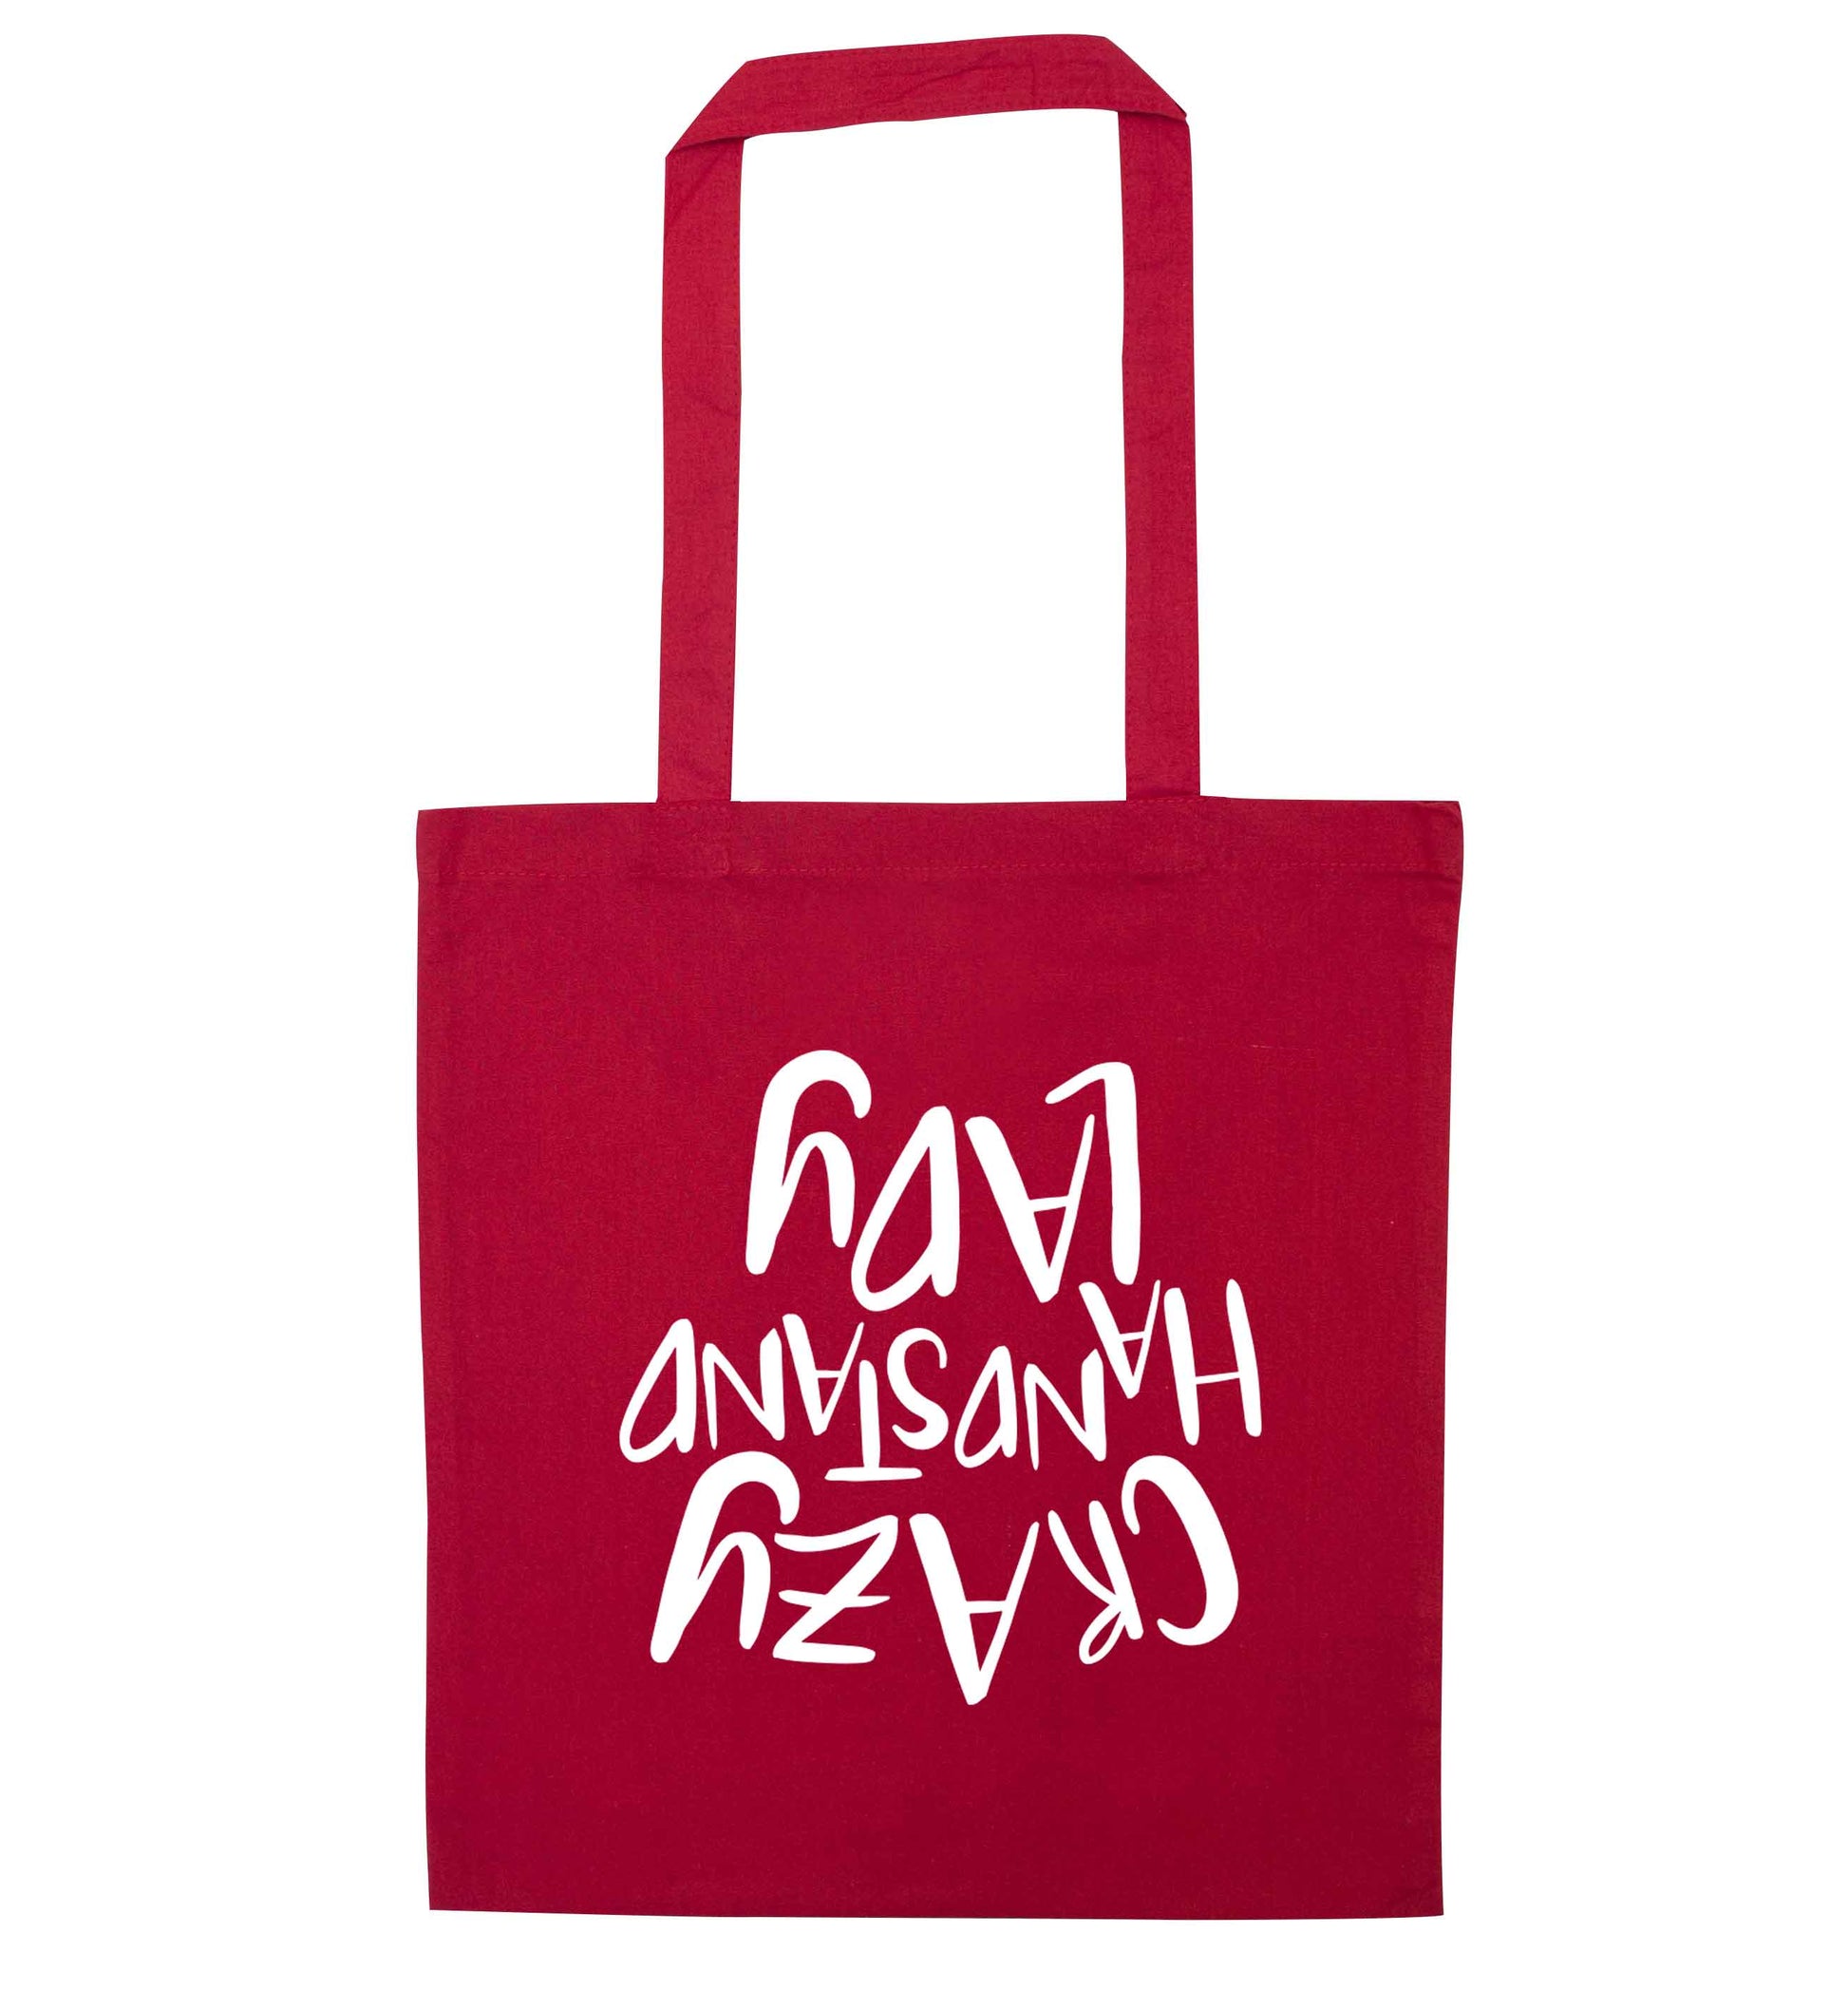 Crazy handstand lady red tote bag